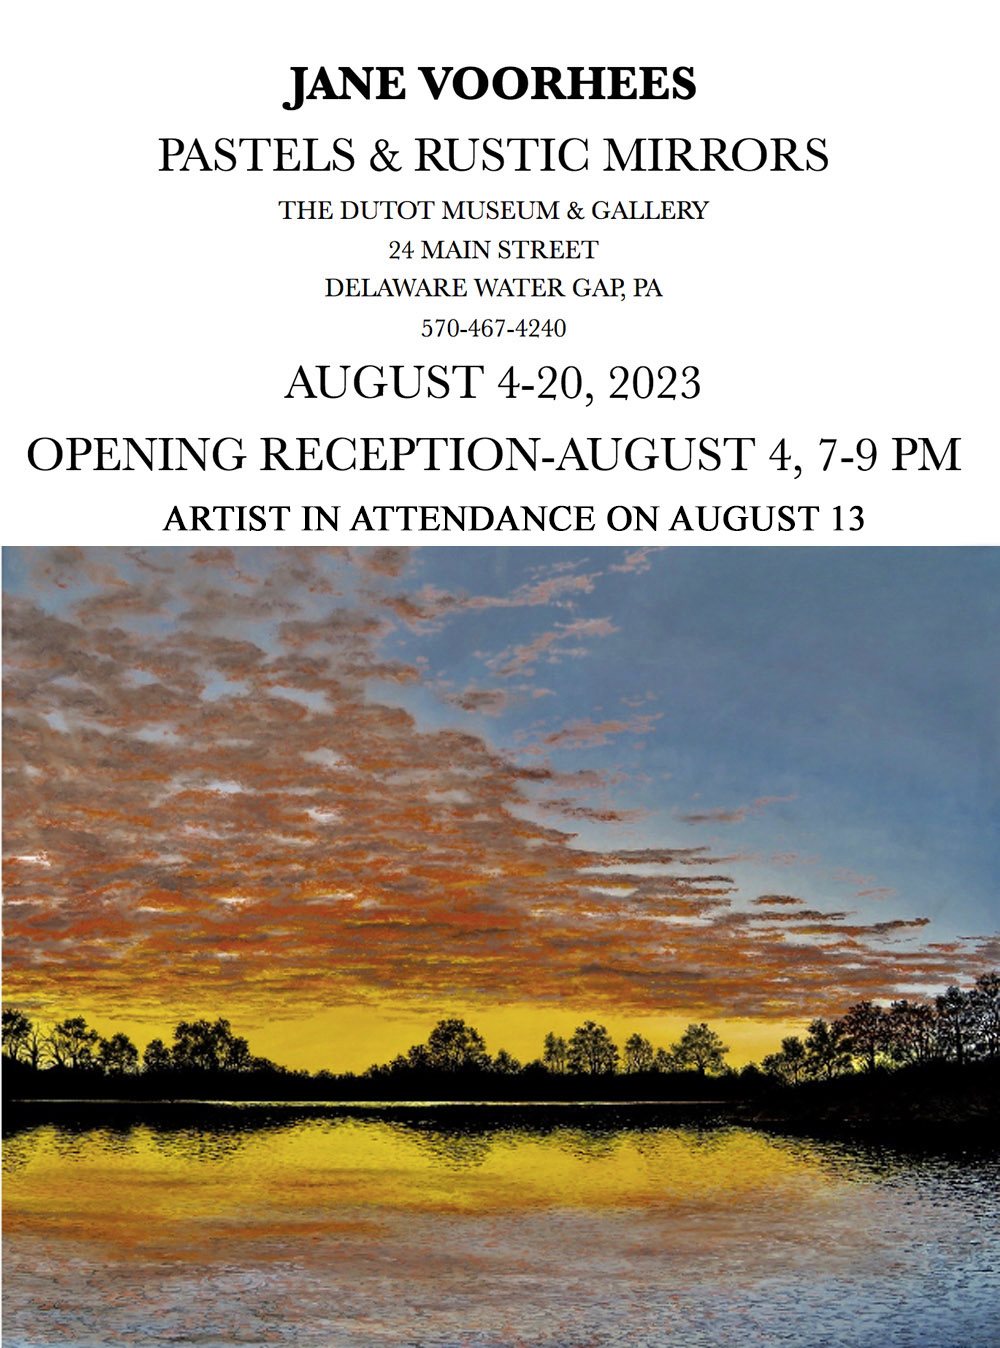 JANE VOORHEES / PASTELS and RUSTIC MIRRORS / THE DUTOT MUSEUM and GALLERY / 24 MAIN STREET, DELAWARE WATER GAP, PA / 570-467-4240 / AUGUST 4-20, 2023 / OPENING RECEPTION-AUGUST 4, 7-9 PM / ARTIST IN ATTENDANCE ON AUGUST 13